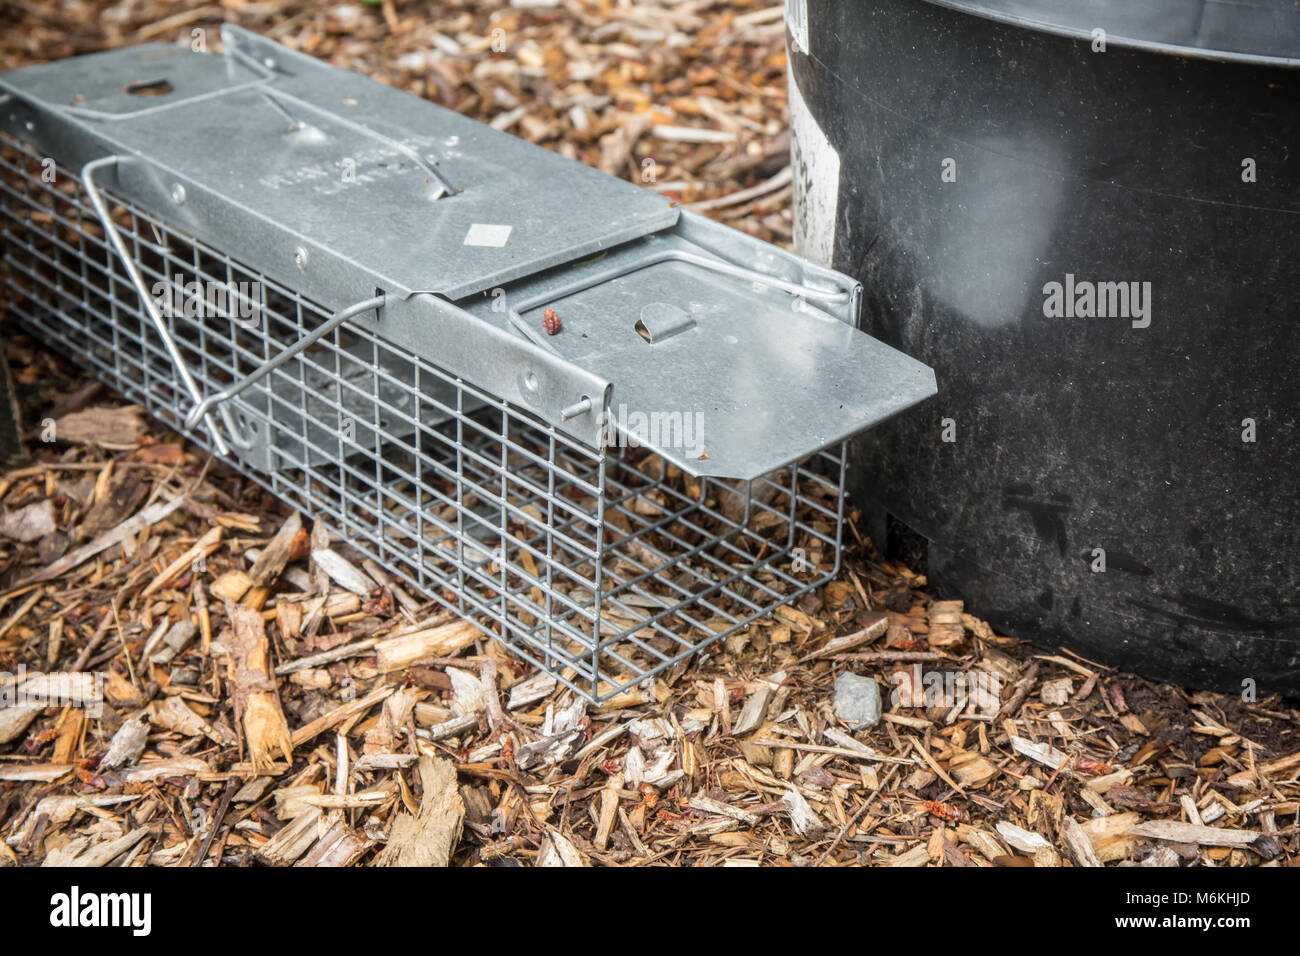 https://c8.alamy.com/comp/M6KHJD/live-animal-trap-designed-to-trap-small-rodents-such-as-moles-voles-M6KHJD.jpg